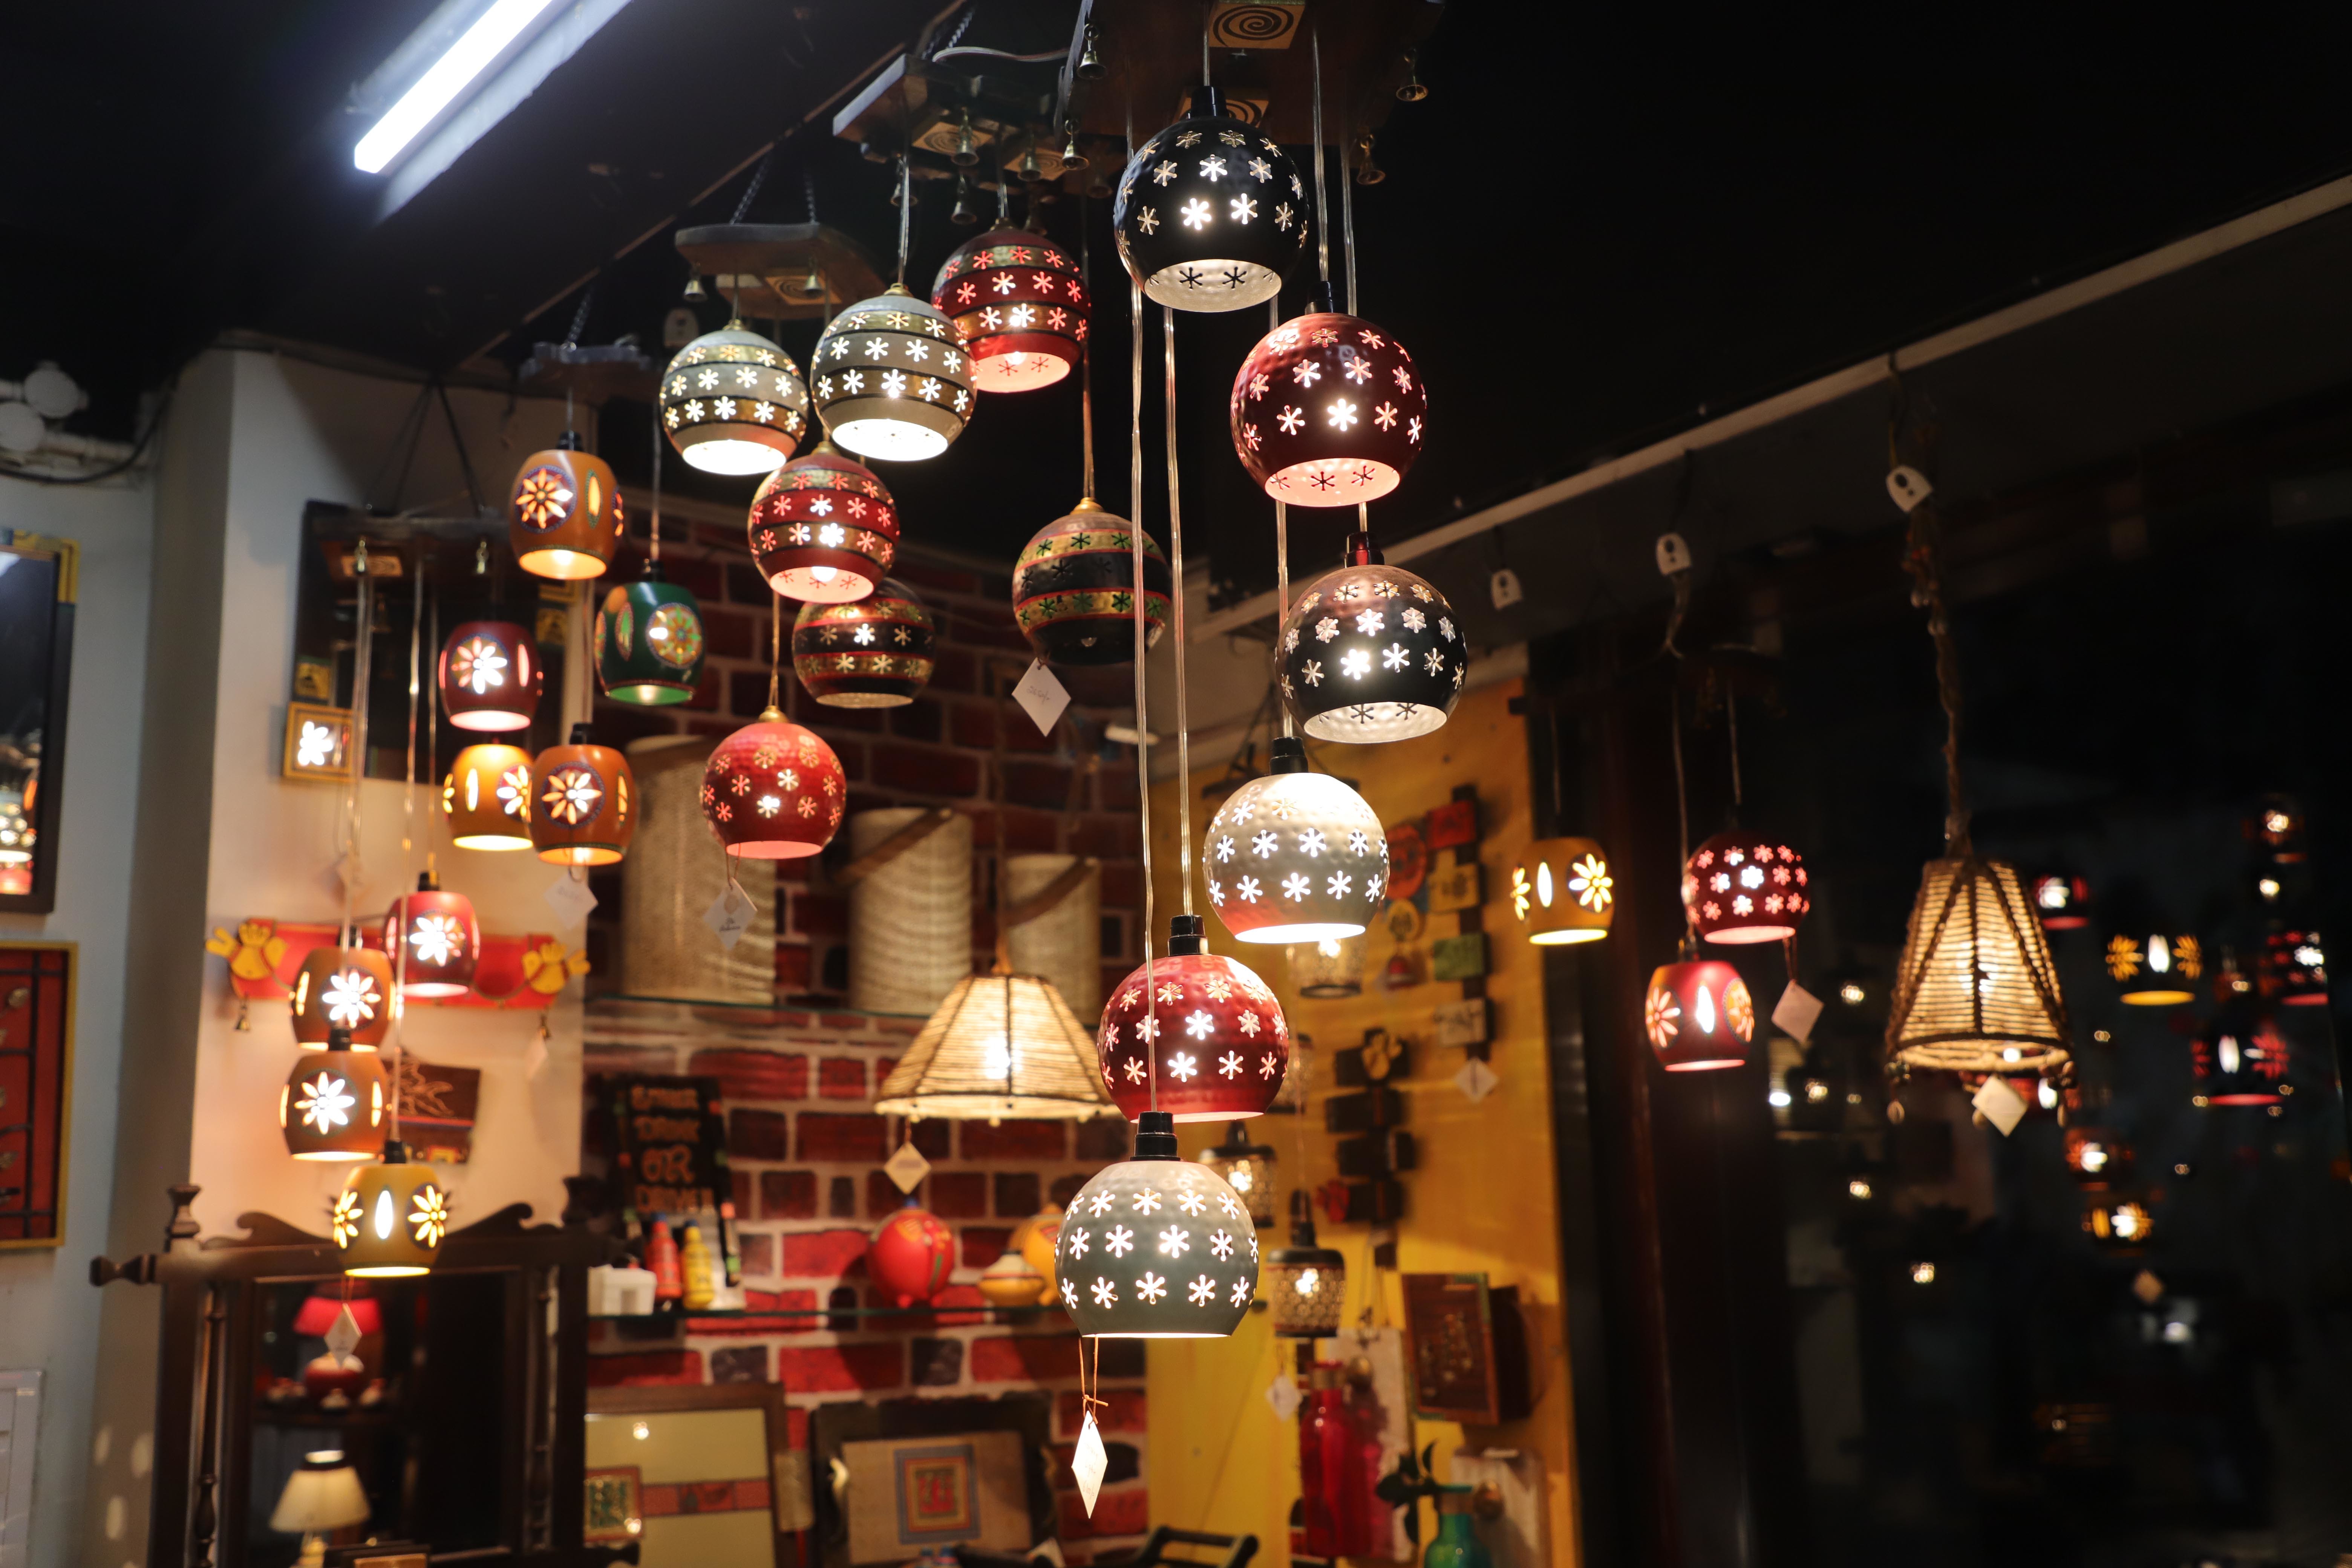 Range of handcrafted and hand-painted metal lights on display